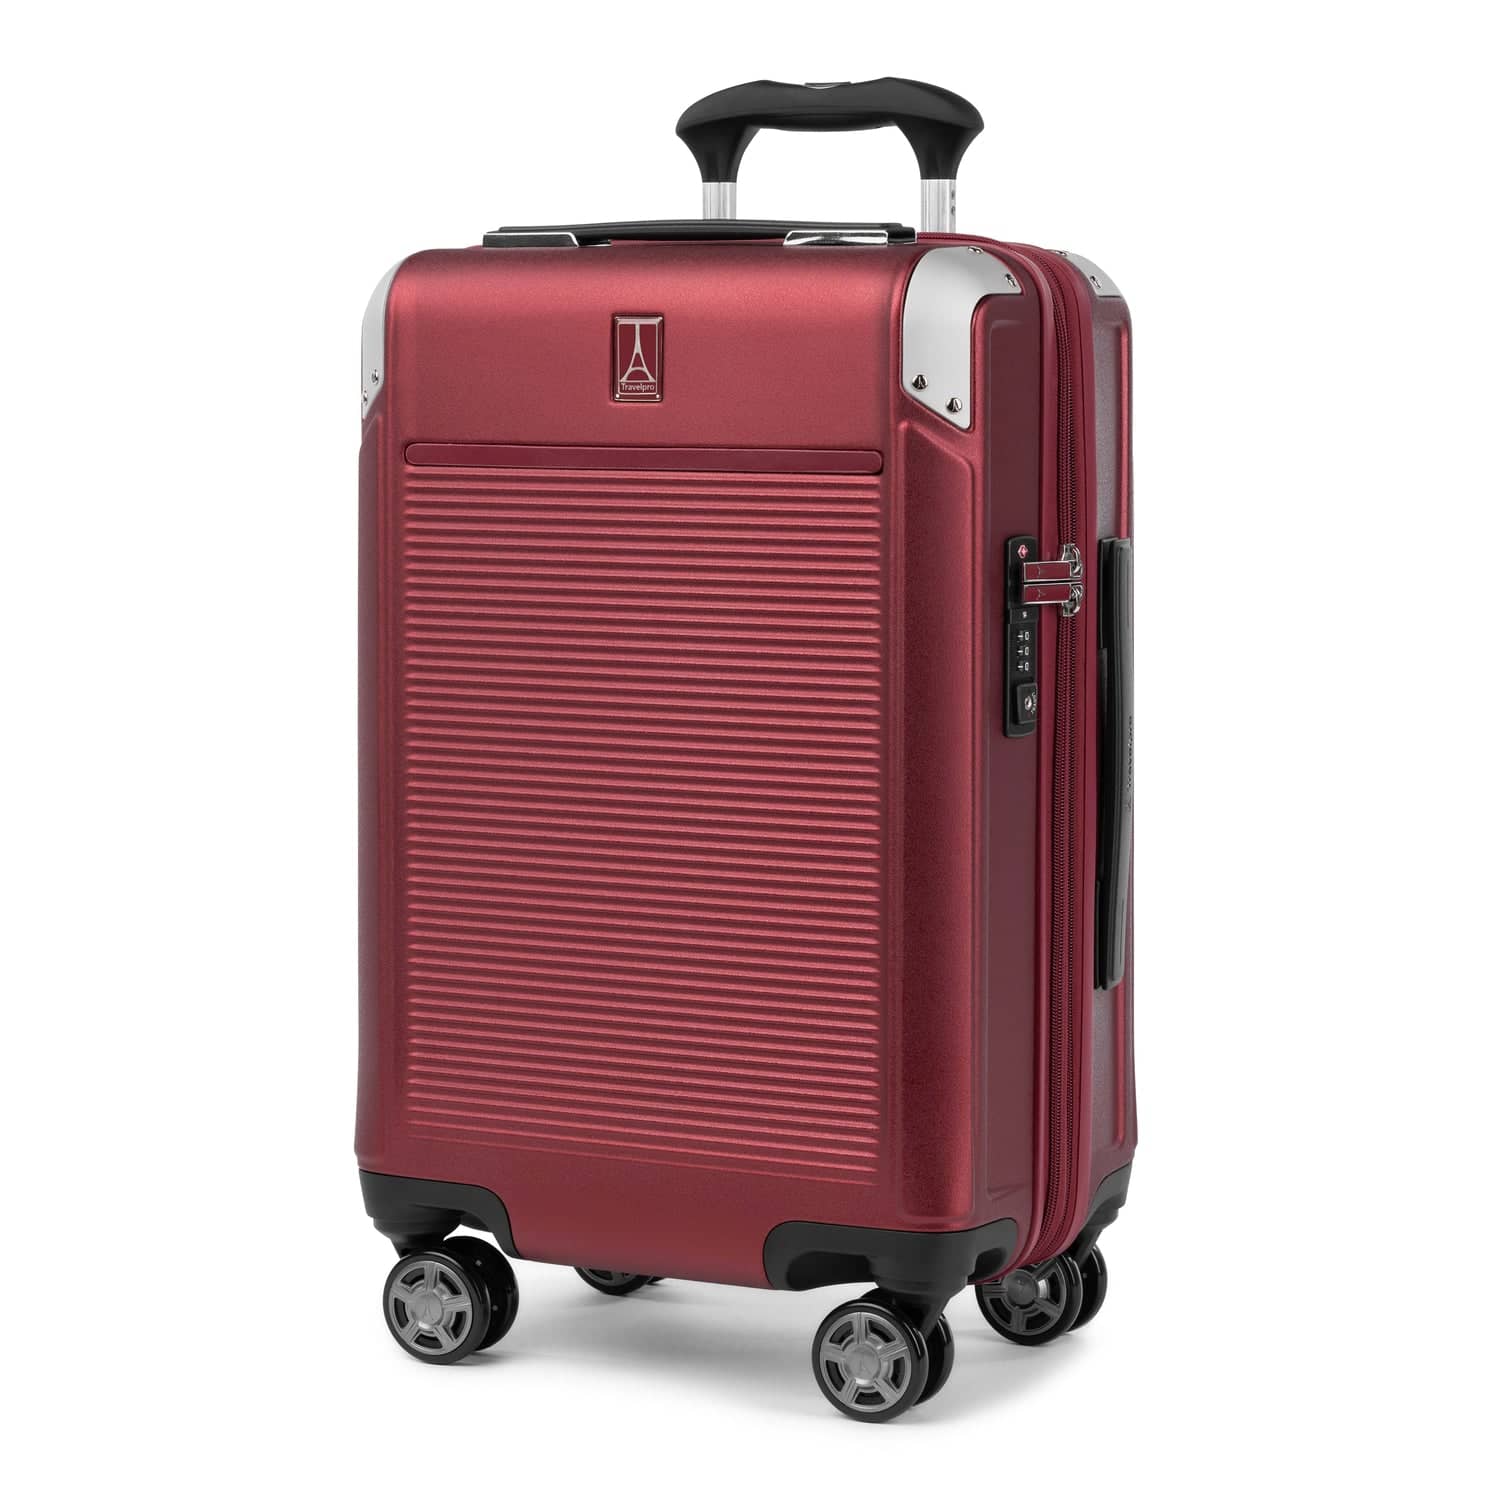 Travelpro Platinum Elite Women's Carry-On Hardside Spinner Luggage in Daring Red | Travel Suitcase